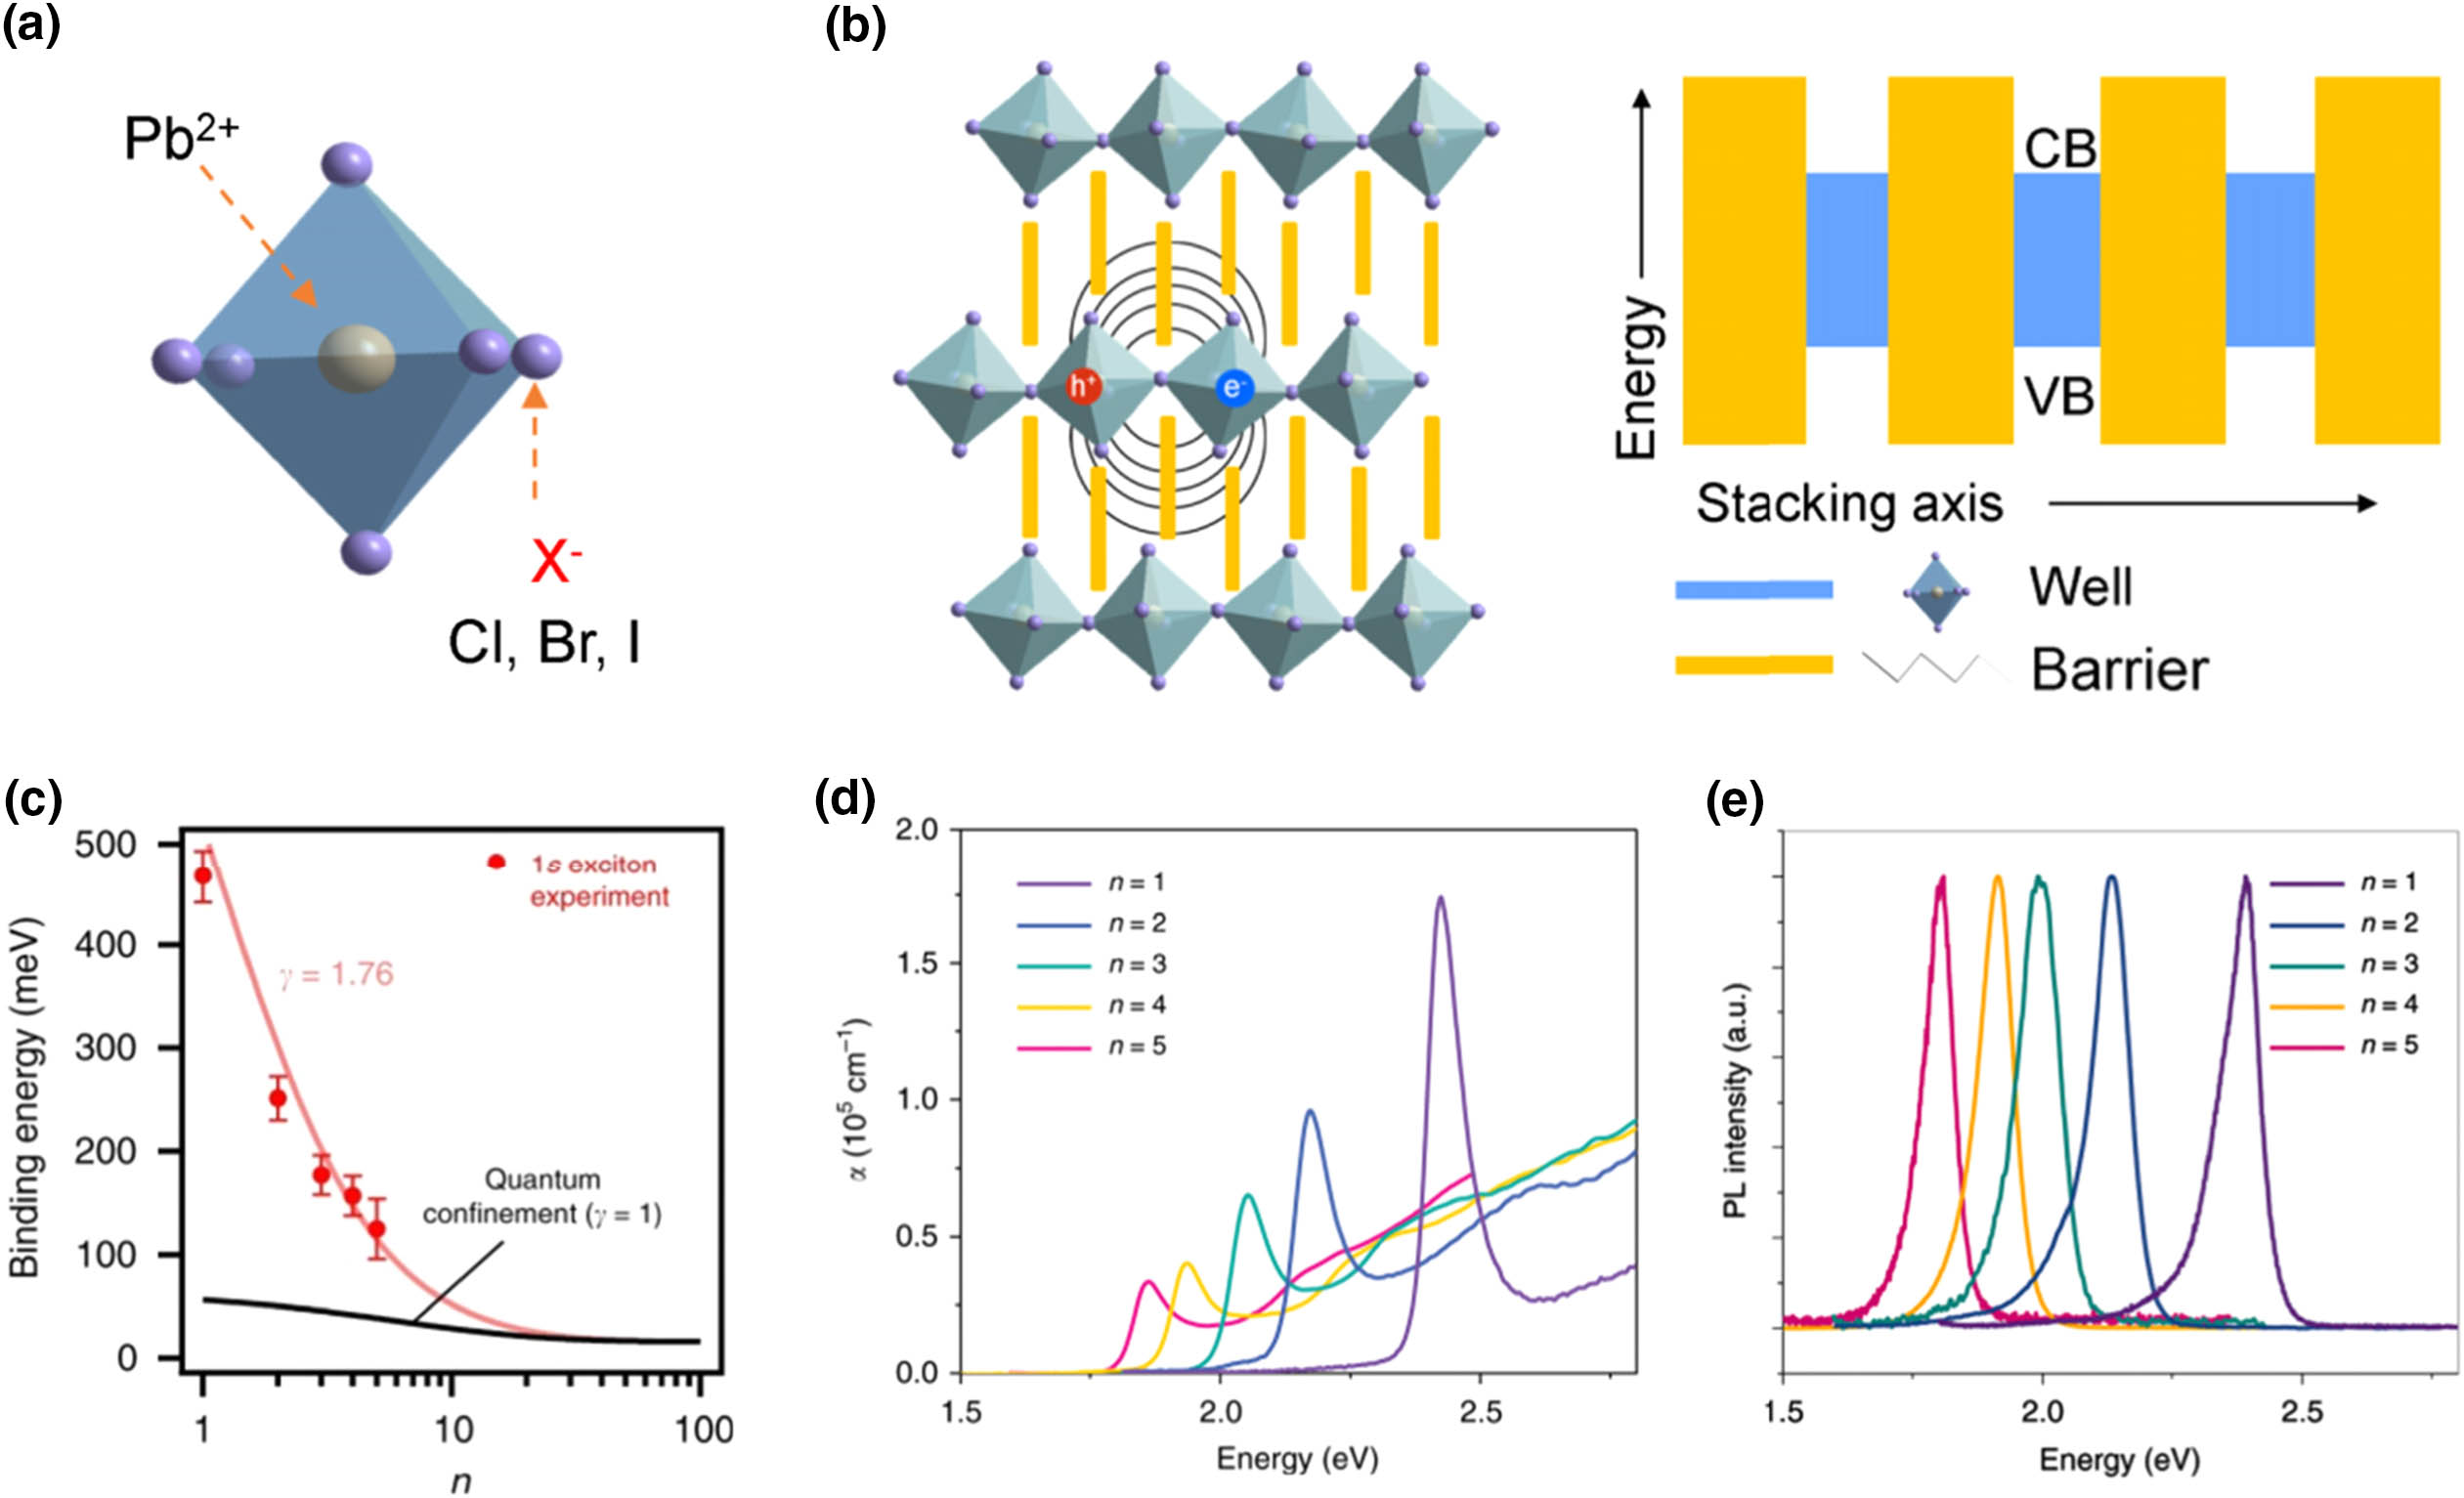 Crystal structure and layer-dependent excitonic properties of 2D perovskite. (a) Fundamental unit of octahedral inorganic framework [PbX6]2−, where X=Cl, Br, I; (b) crystal structure of 2D layered perovksite. The inorganic layers are surrounded by insulative organic layers, resulting in self-assembled multiple quantum-well structures, where interlayer organic cations provide both dielectric and quantum confinement for inorgaic stacks. (c) The exciton binding energy of 2D perovskite decreases with inorganic layer number as a result of weak quantum confinement at large inorganic layer numbers [13]. Copyright 2018, Springer Nature. (d) and (e) are the absorpation and PL spectra of 2D perovskite (BA)2(MA)n−1PbnI3n+1 at different n values [14]. Copyright 2020, Springer Nature.